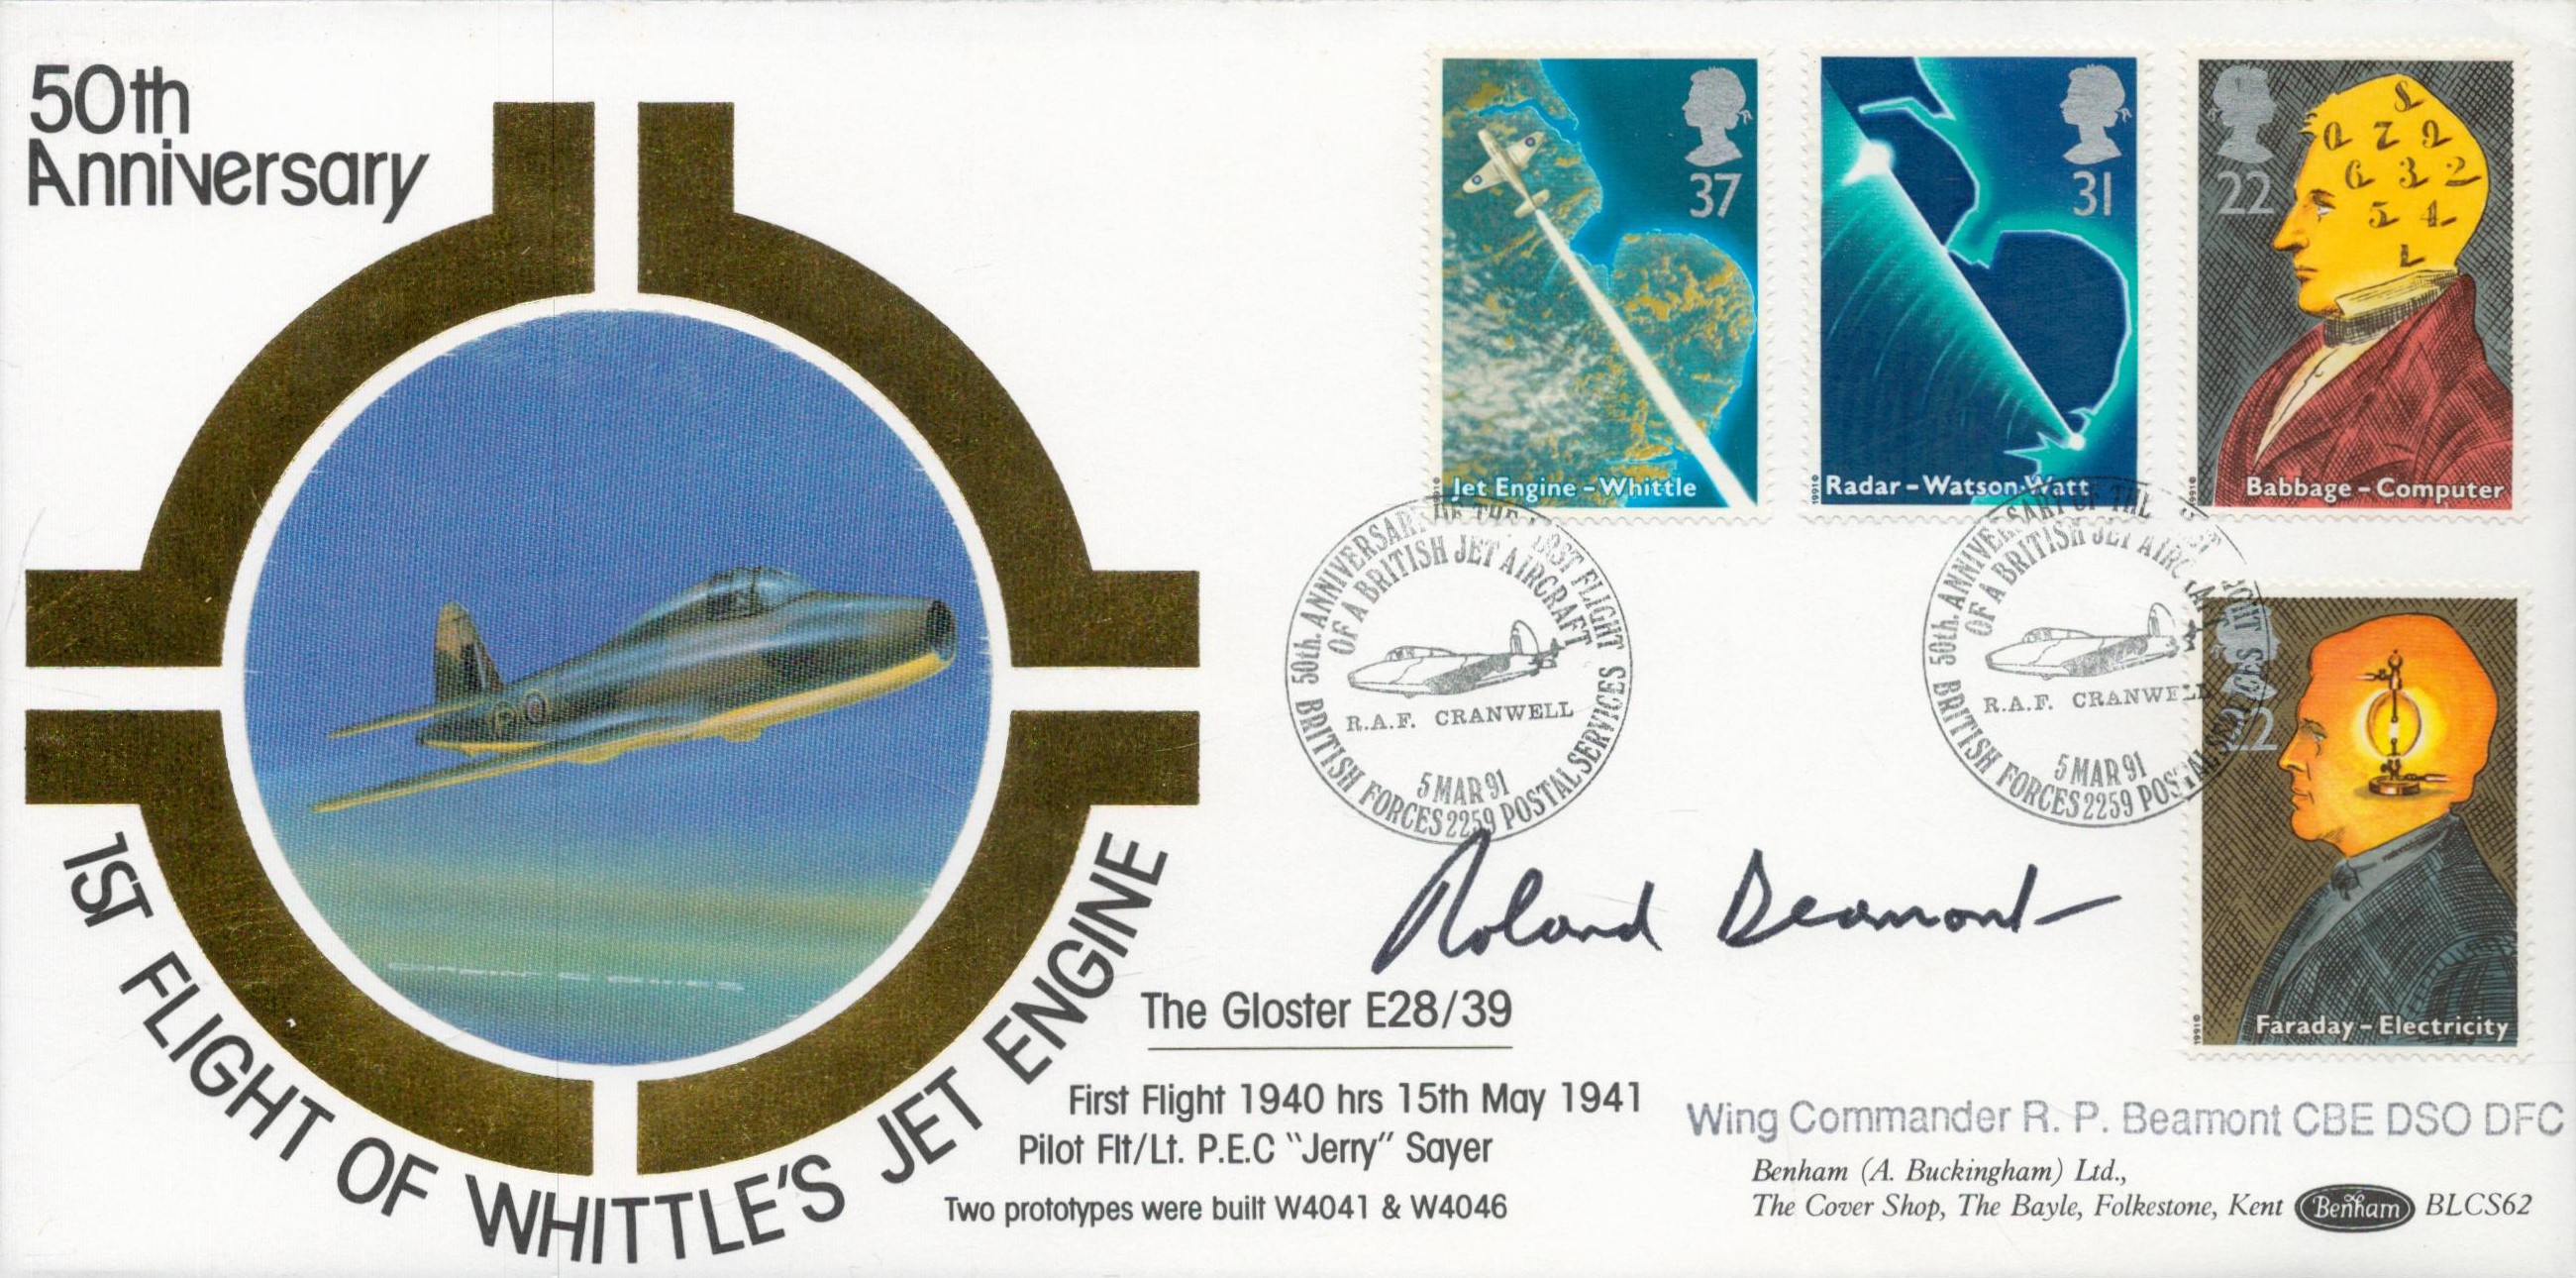 Wing Commander Roland P Beamont Signed and Flown Benham FDC 50th Anniversary - 1st Flight of